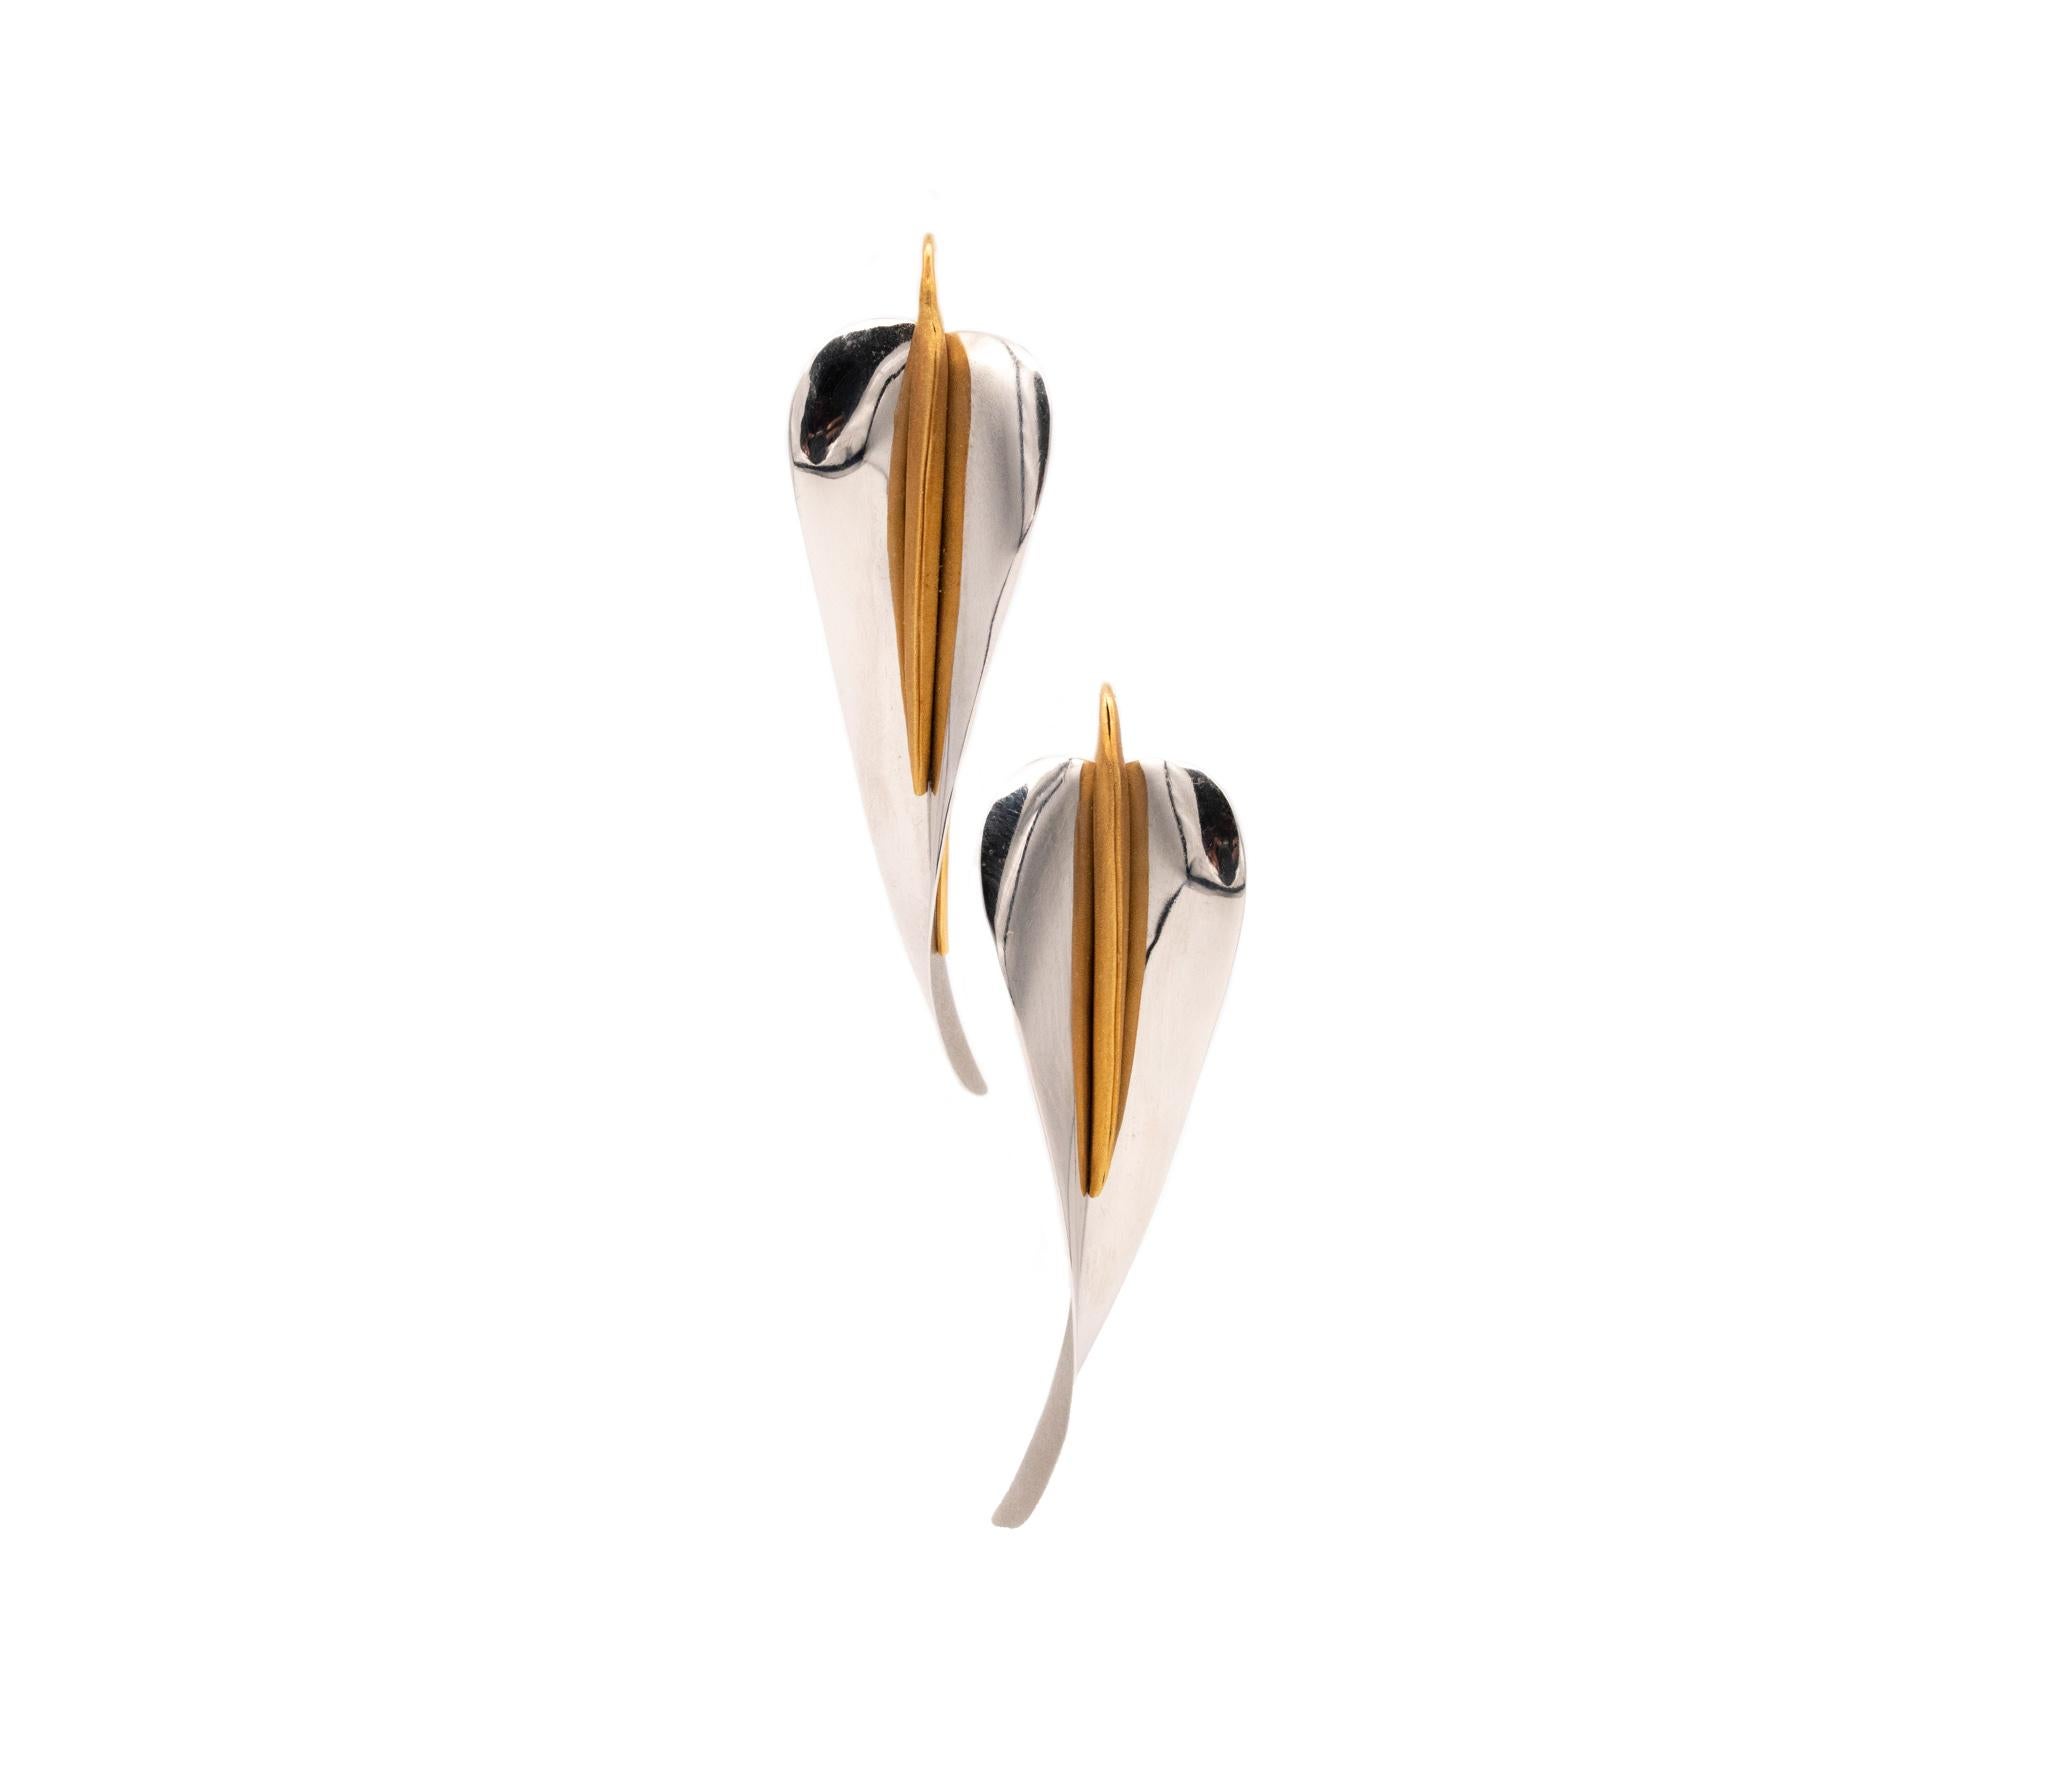 Calla lily drop earrings designed by Michael Good.

A beautiful pair, created with the stylized shape of the lily flower with pistils. They was crafted by the talented goldsmith-artist Michael Good in solid high polished platinum and 18 karats of